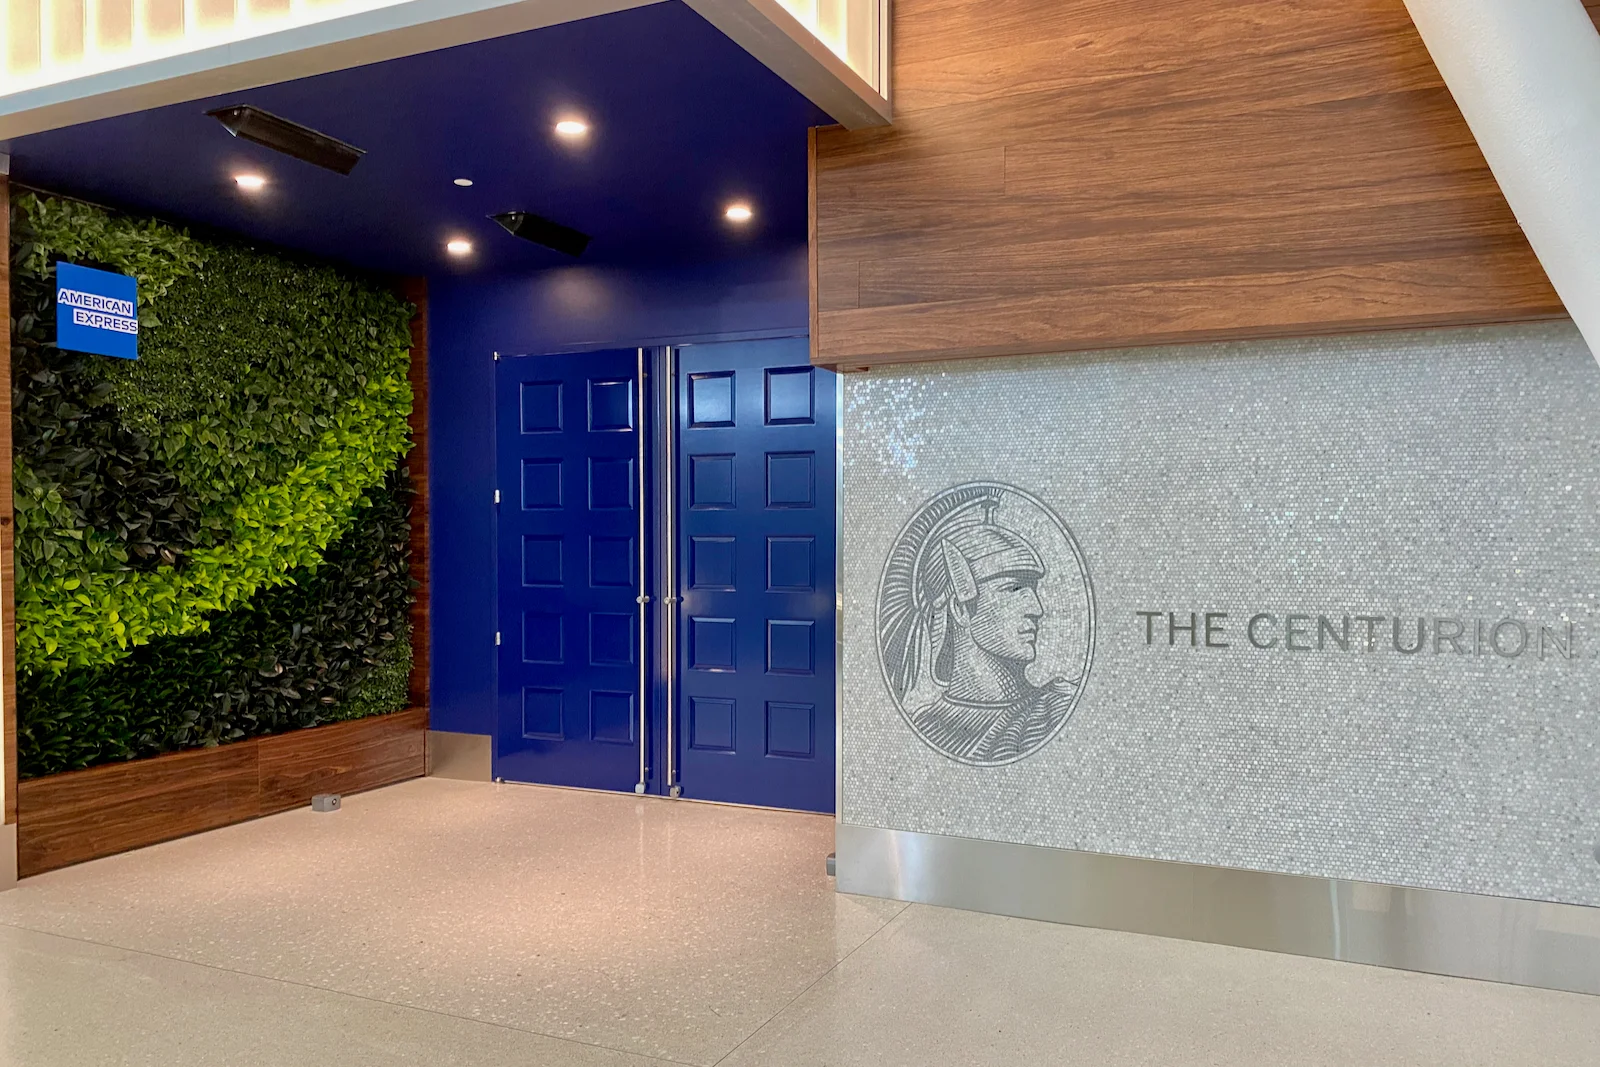 Next month, Amex will begin charging customers who use the Centurion Lounge using their credit cards.